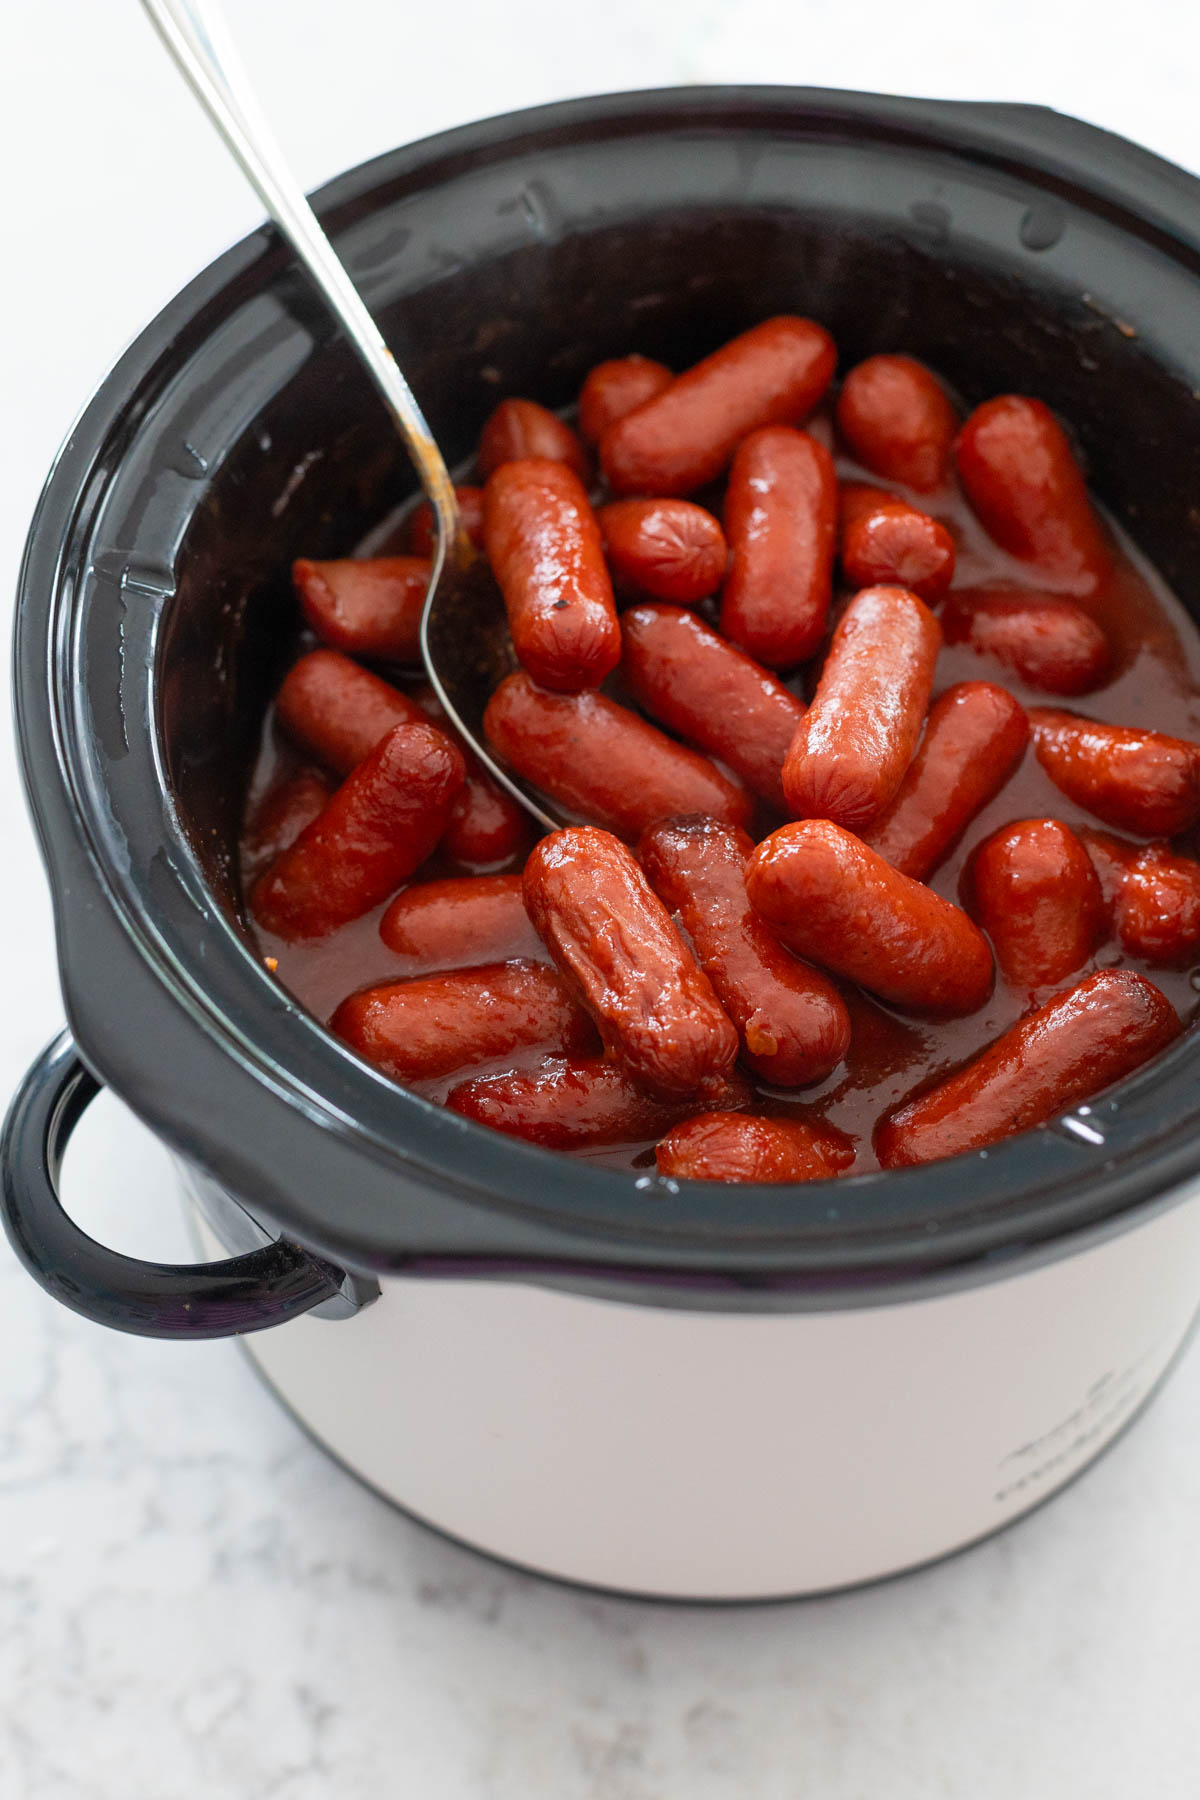 Saucy little hot dogs are in a slowcooker being stirred by a spoon.